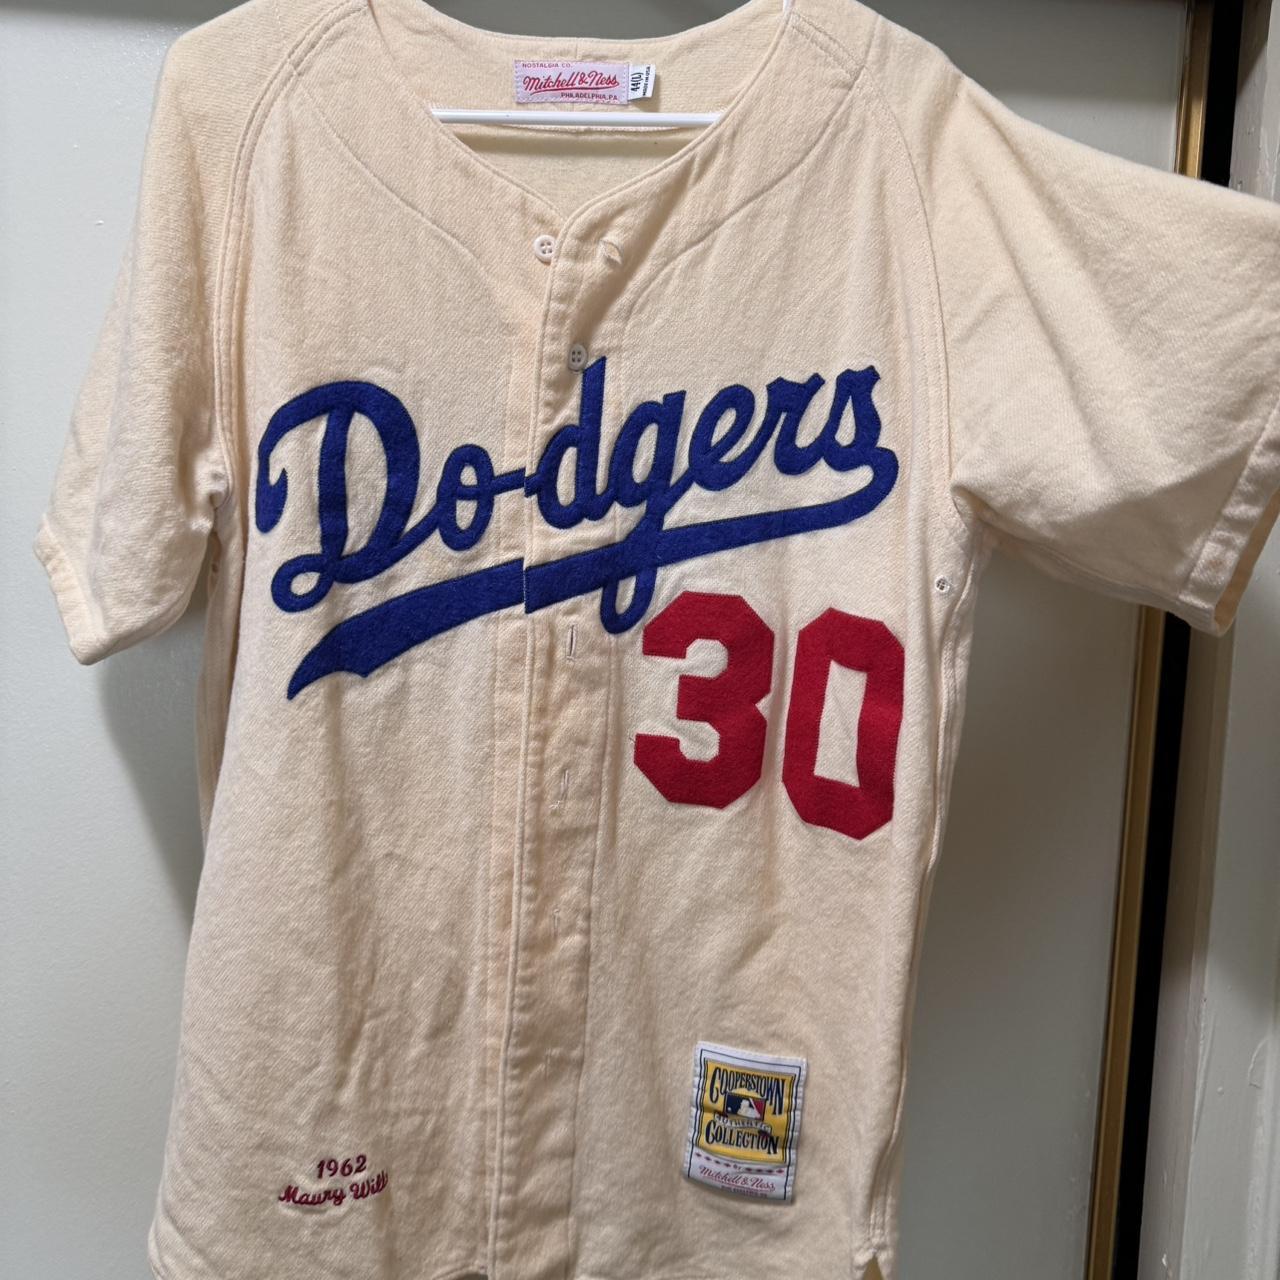 Maury Wills 1962 Brooklyn Dodgers Mitchell & Ness Authentic